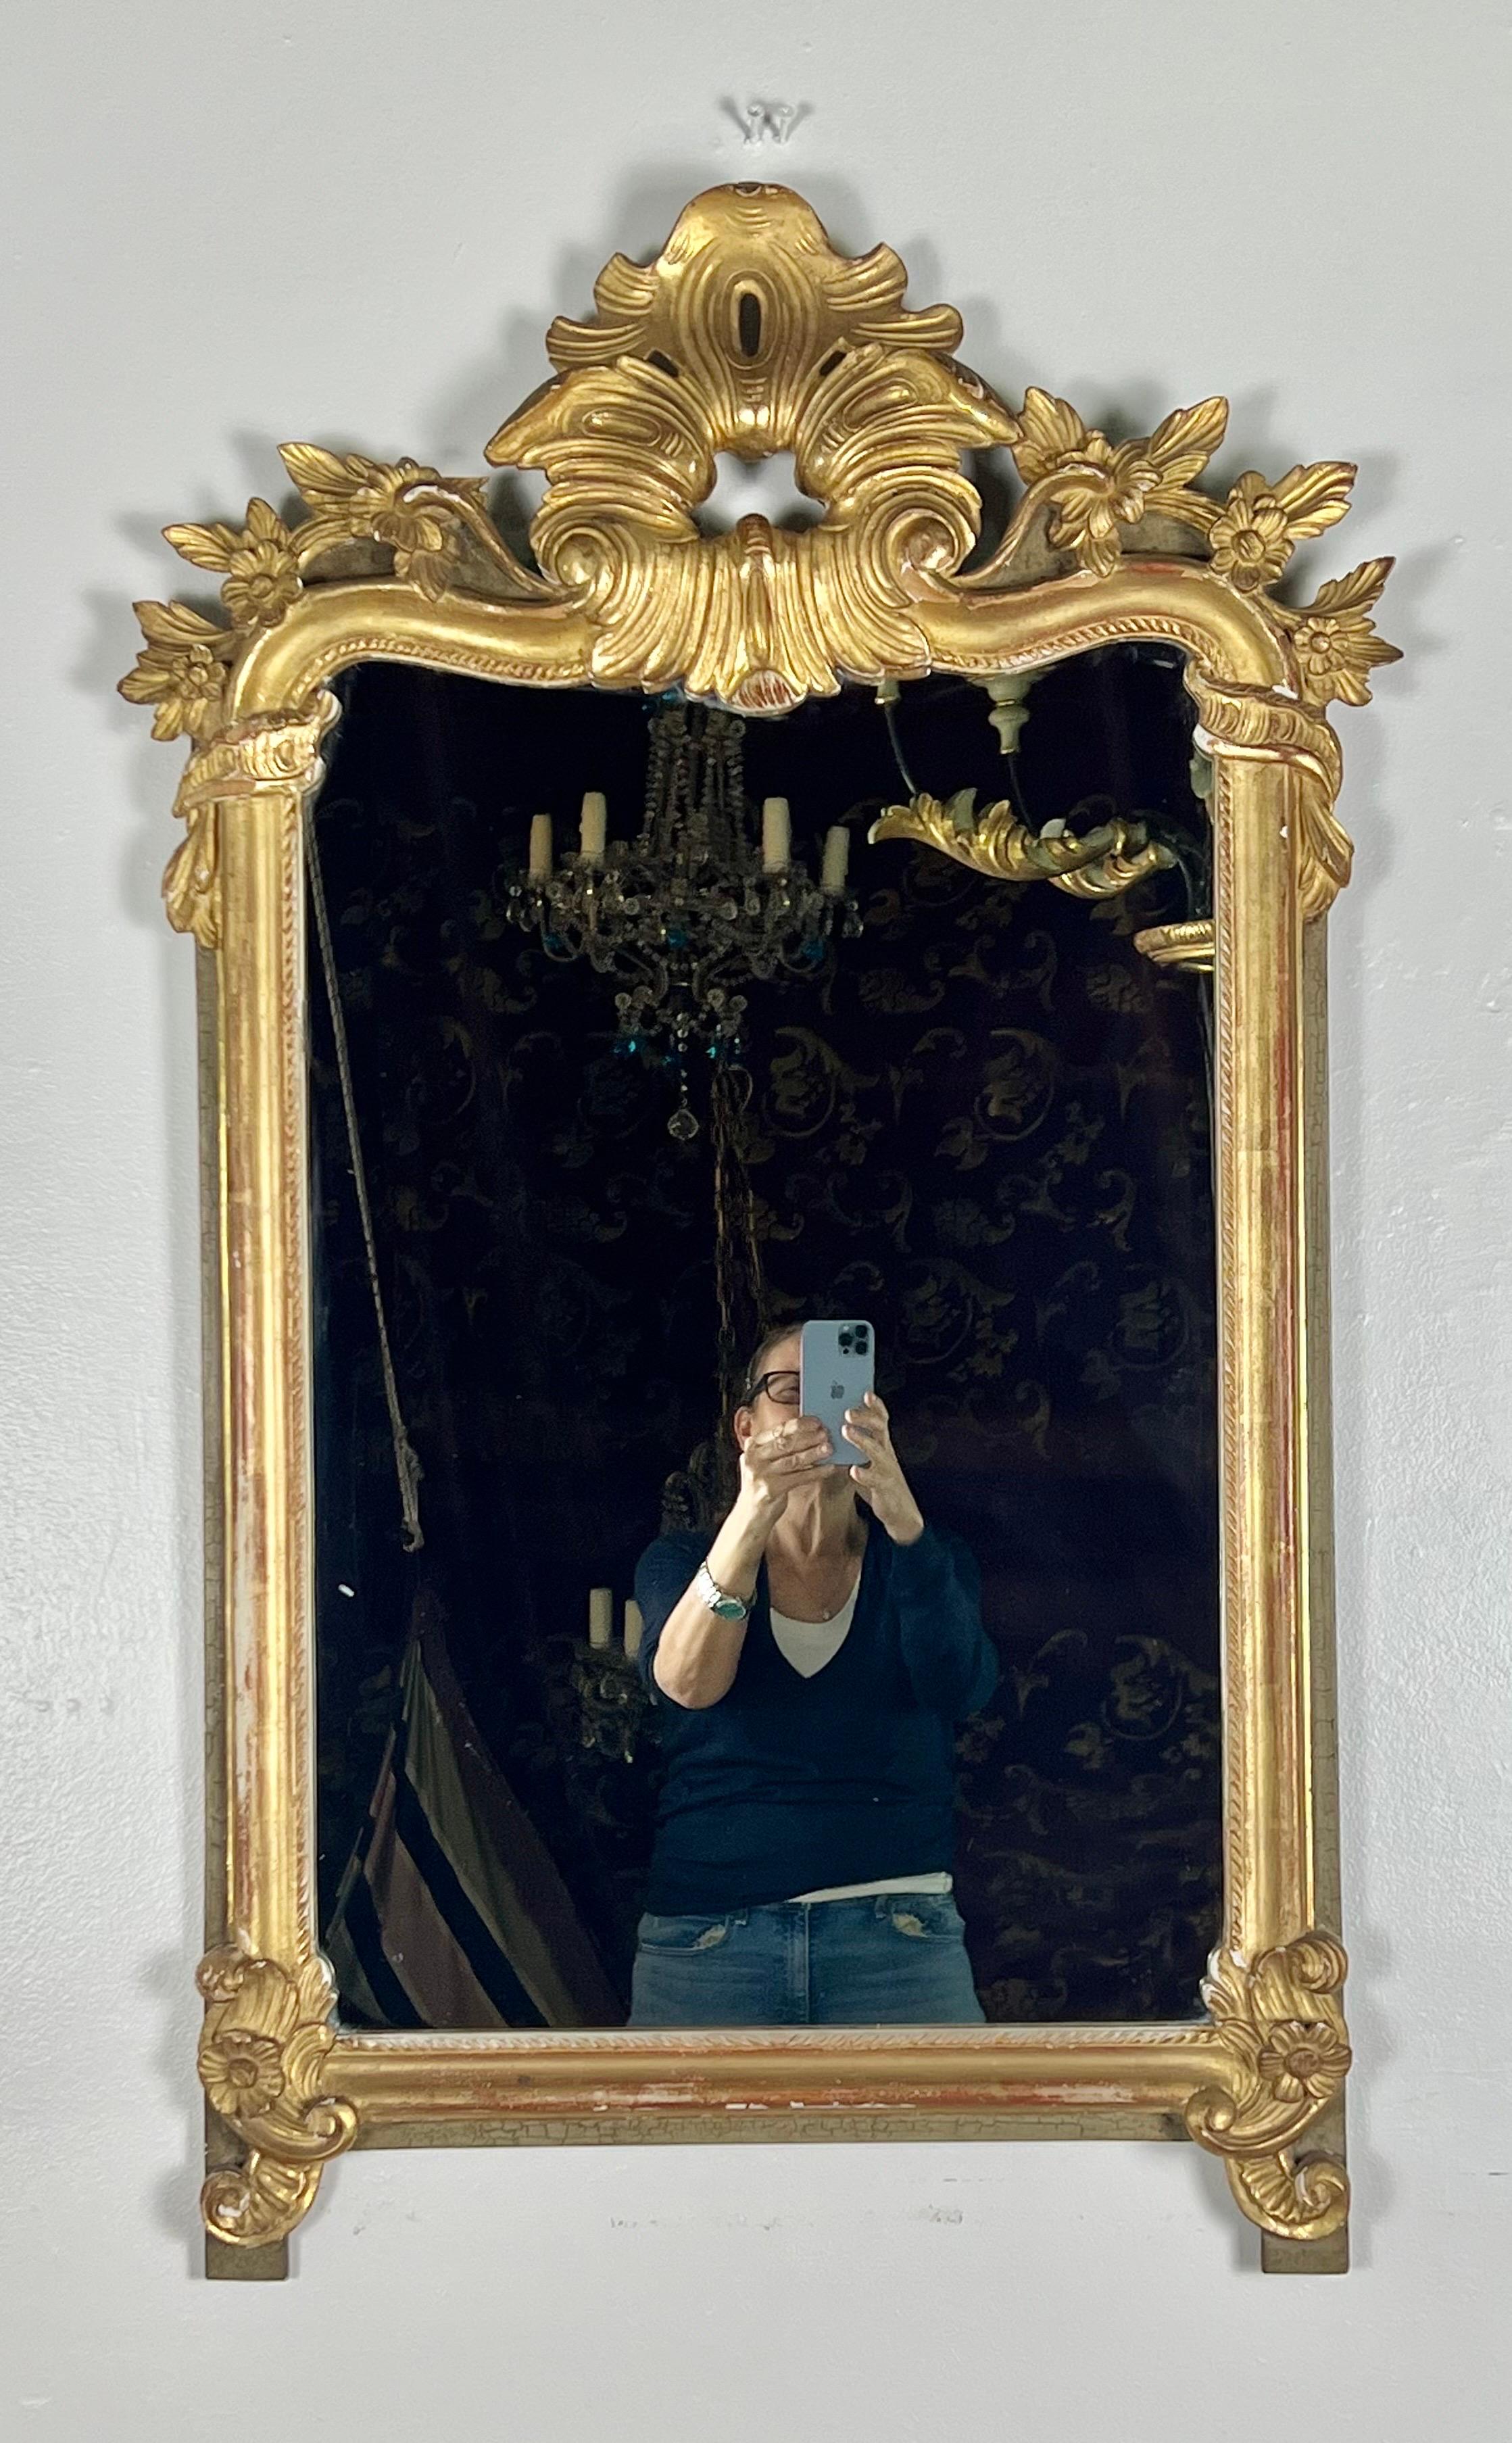 19th century French giltwood mirror. The mirror is beautifully carved with tiny flowers flanking a center acanthus leaf inspired design. The mirror is finished in 22K gold leaf. The mirror stands on scrolled acanthus leaf feet.